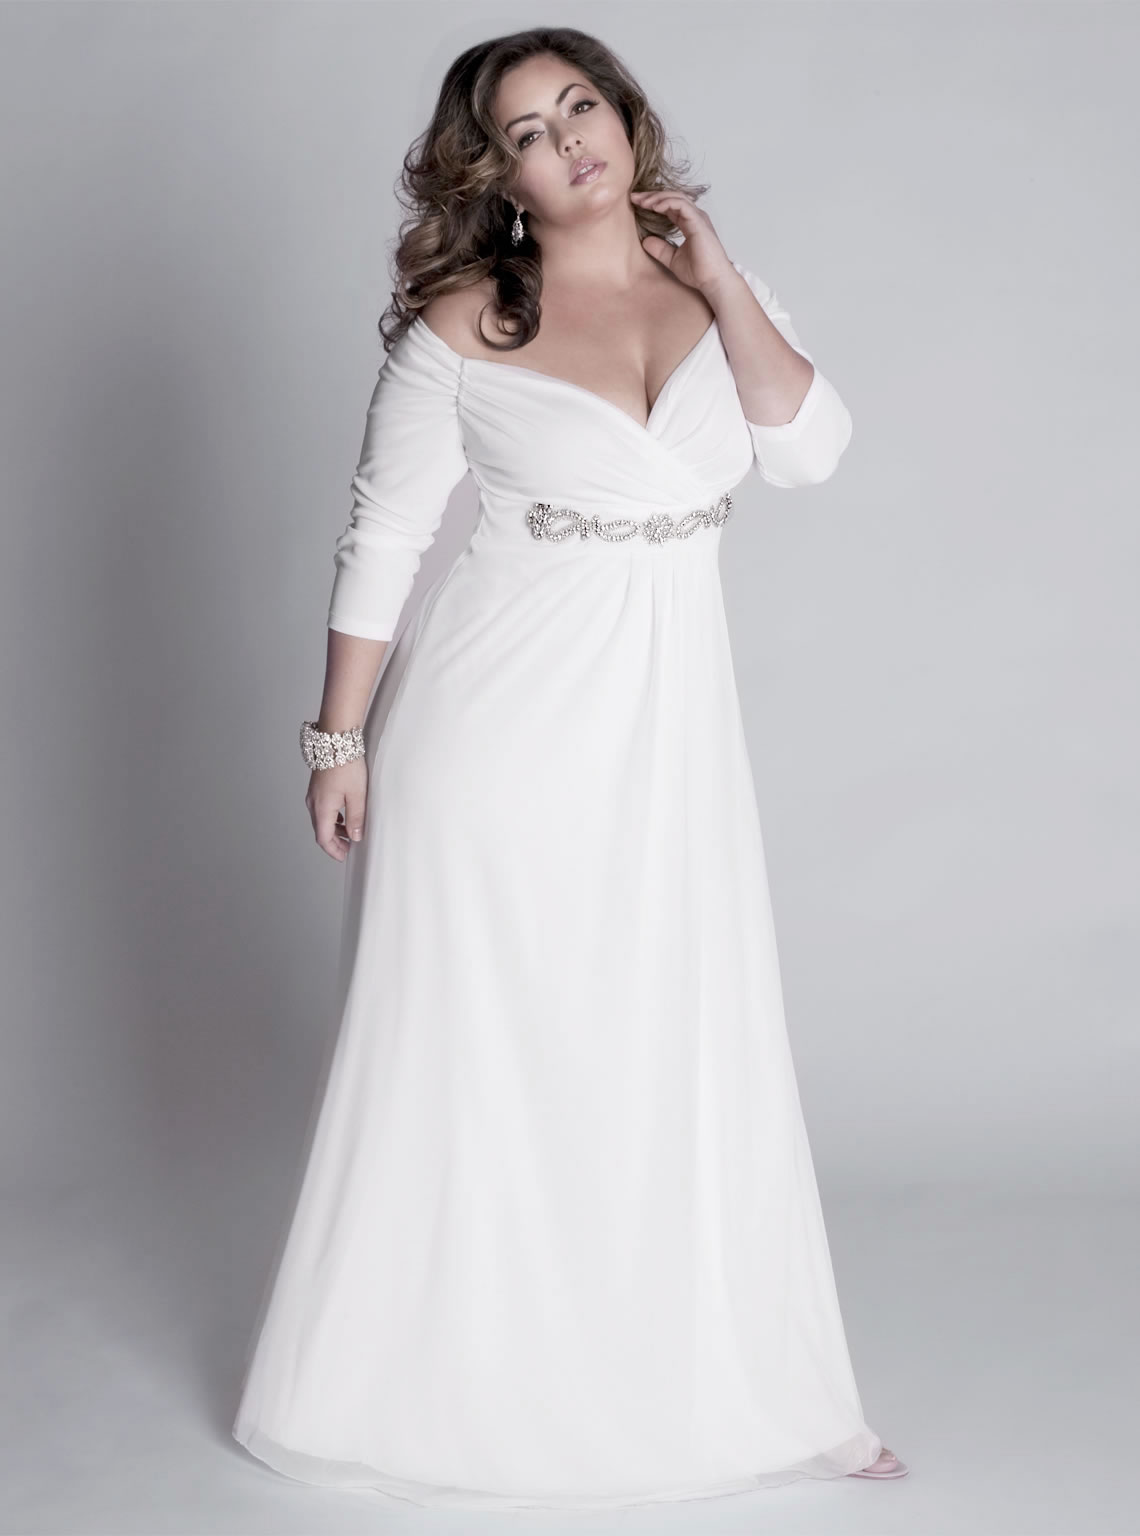 wedding dresses for fuller figures with sleeves